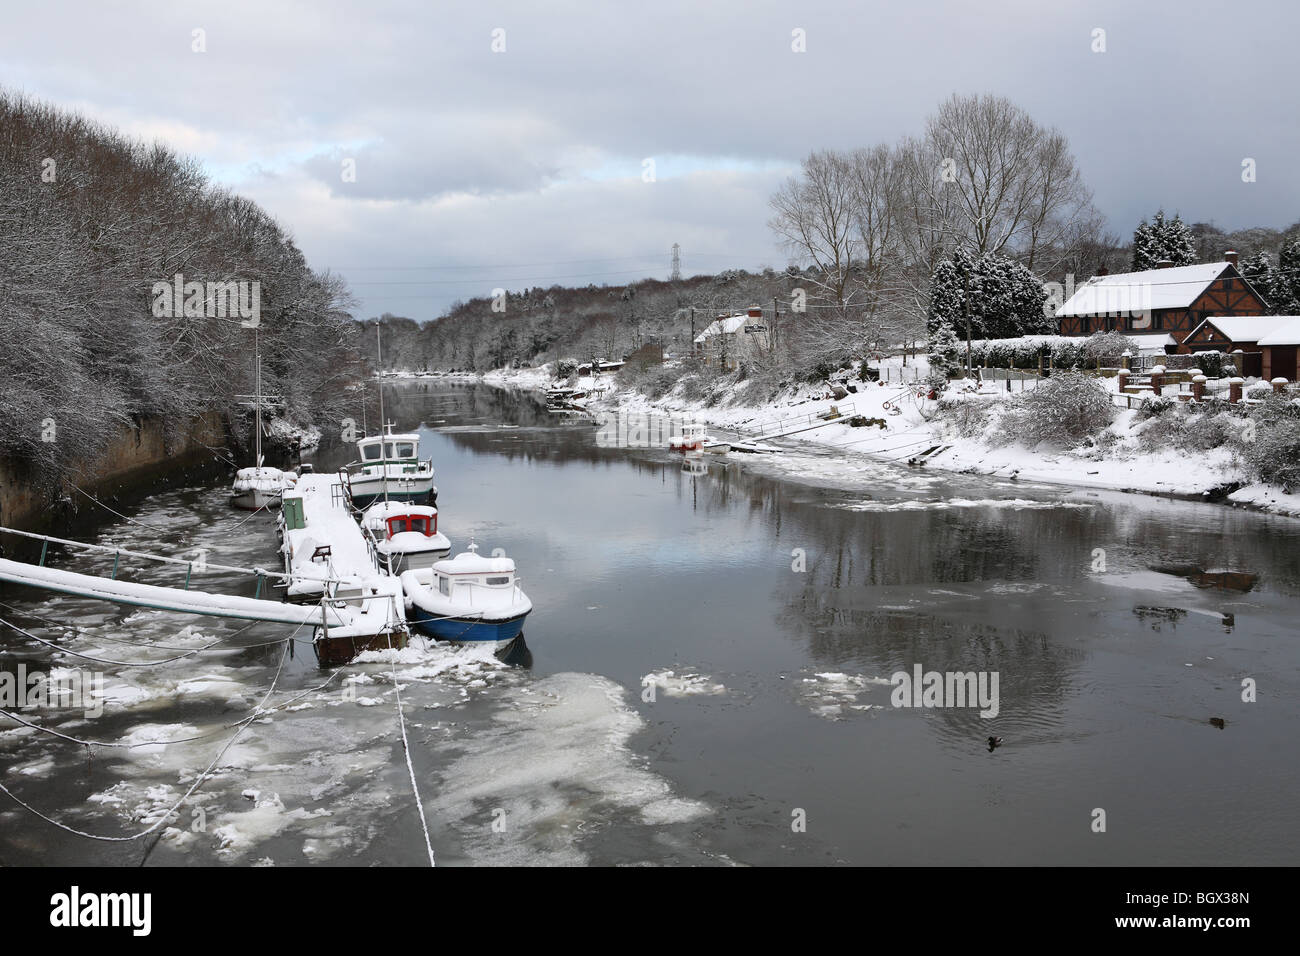 Freezing conditions on the river Wear at Cox Green, Sunderland, UK Stock Photo